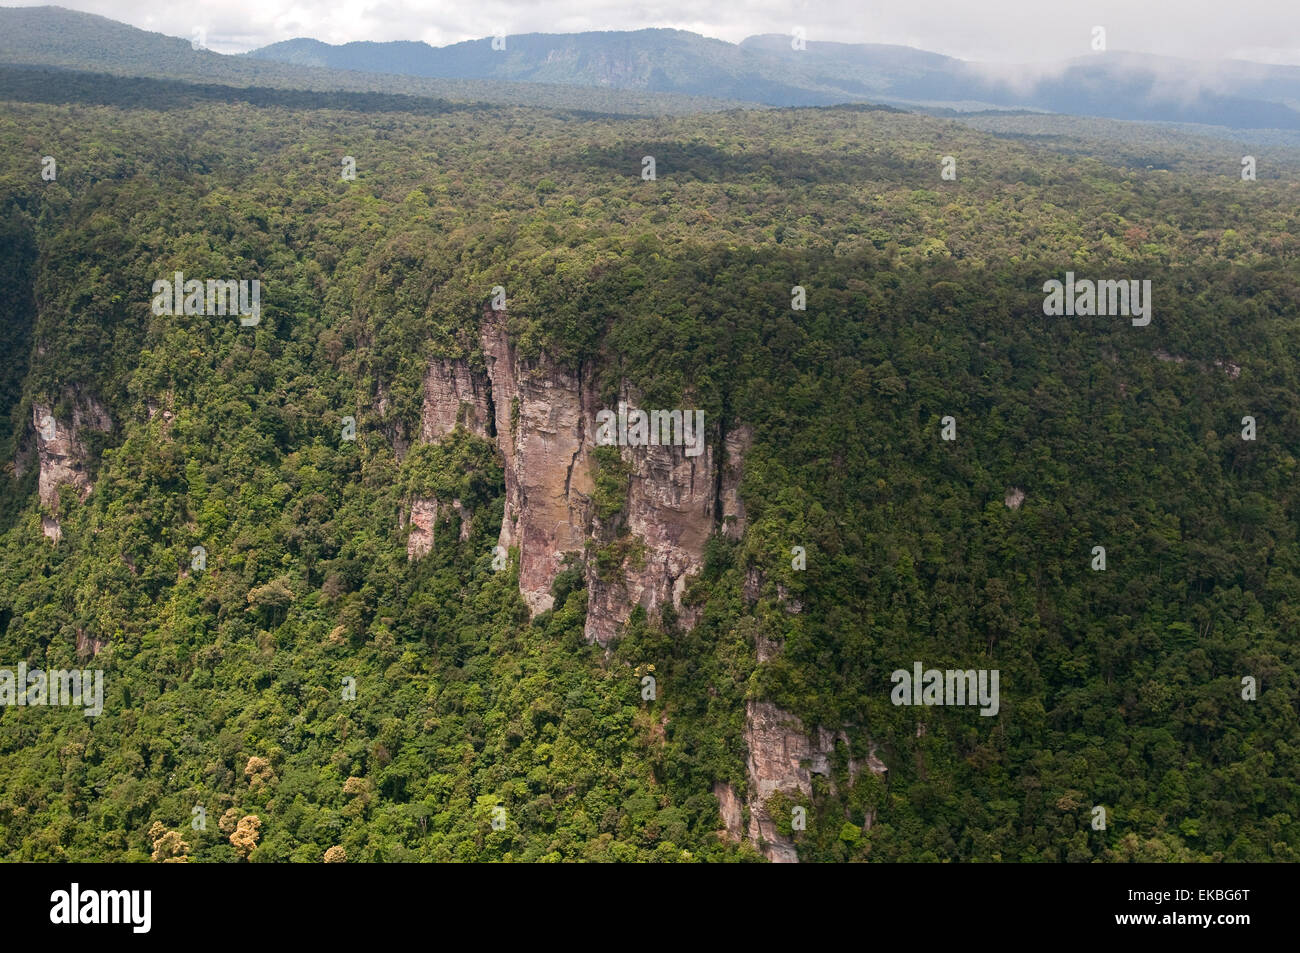 Aerial view of mountainous rainforest in Guyana, South America Stock Photo